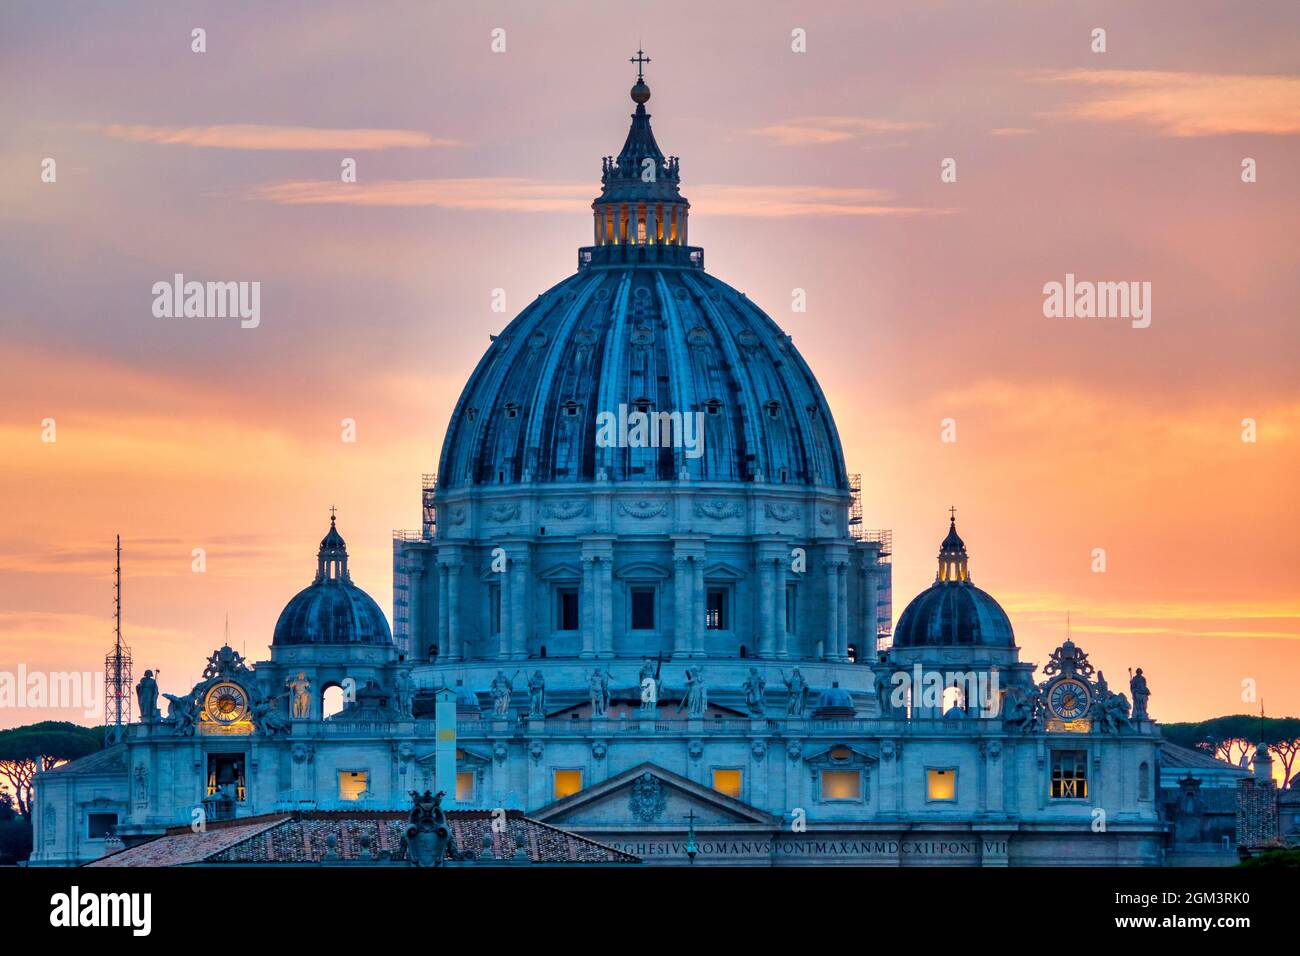 Dome of the Saint Peter's Basilica at sunset, Rome, Italy Stock Photo